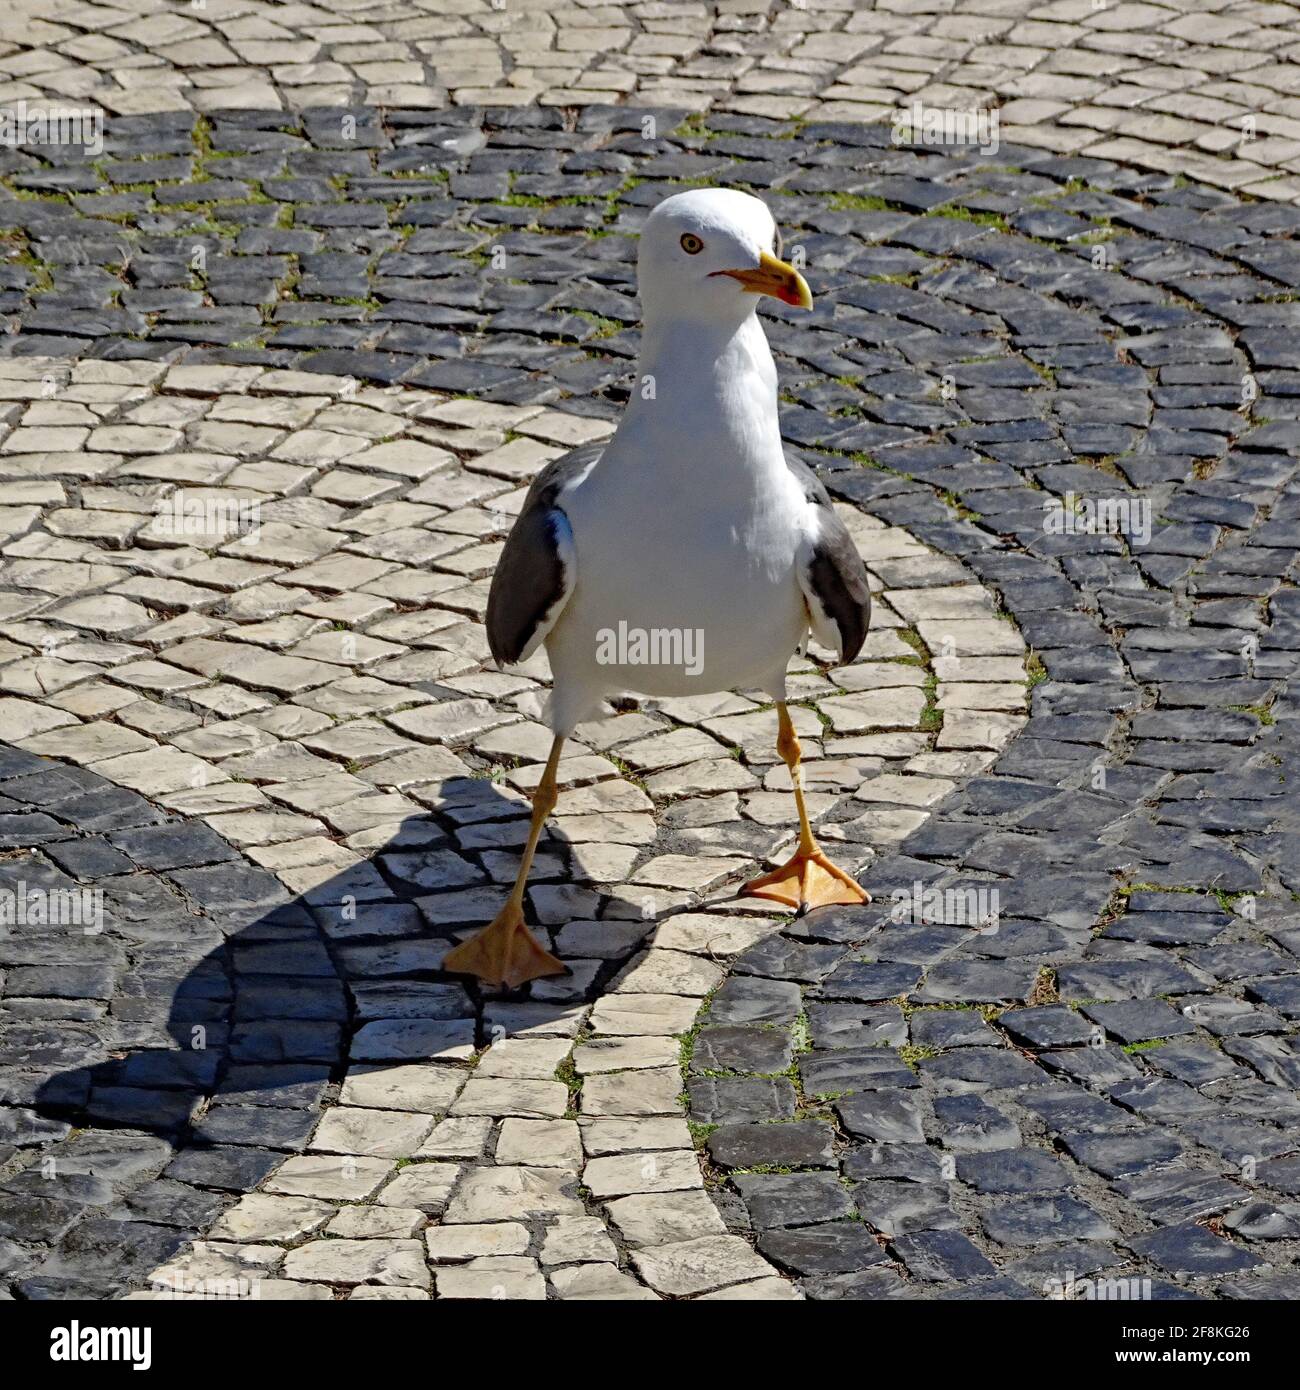 This seagull is extremely tense. Does he have to fly or fight to get the food? He is standing on the typical Portuguese cobblestones Stock Photo